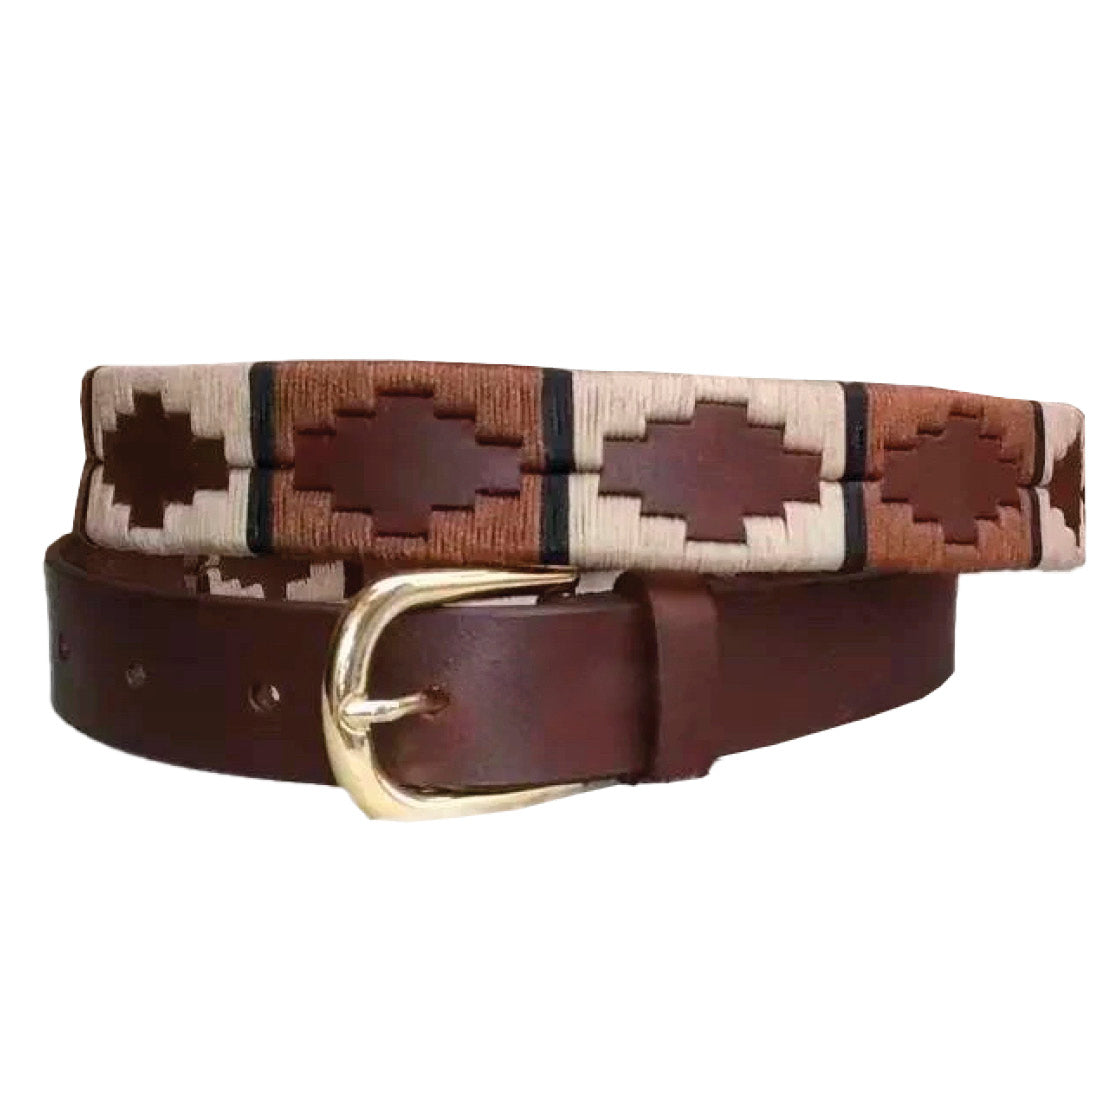 Polo belt tan and brown